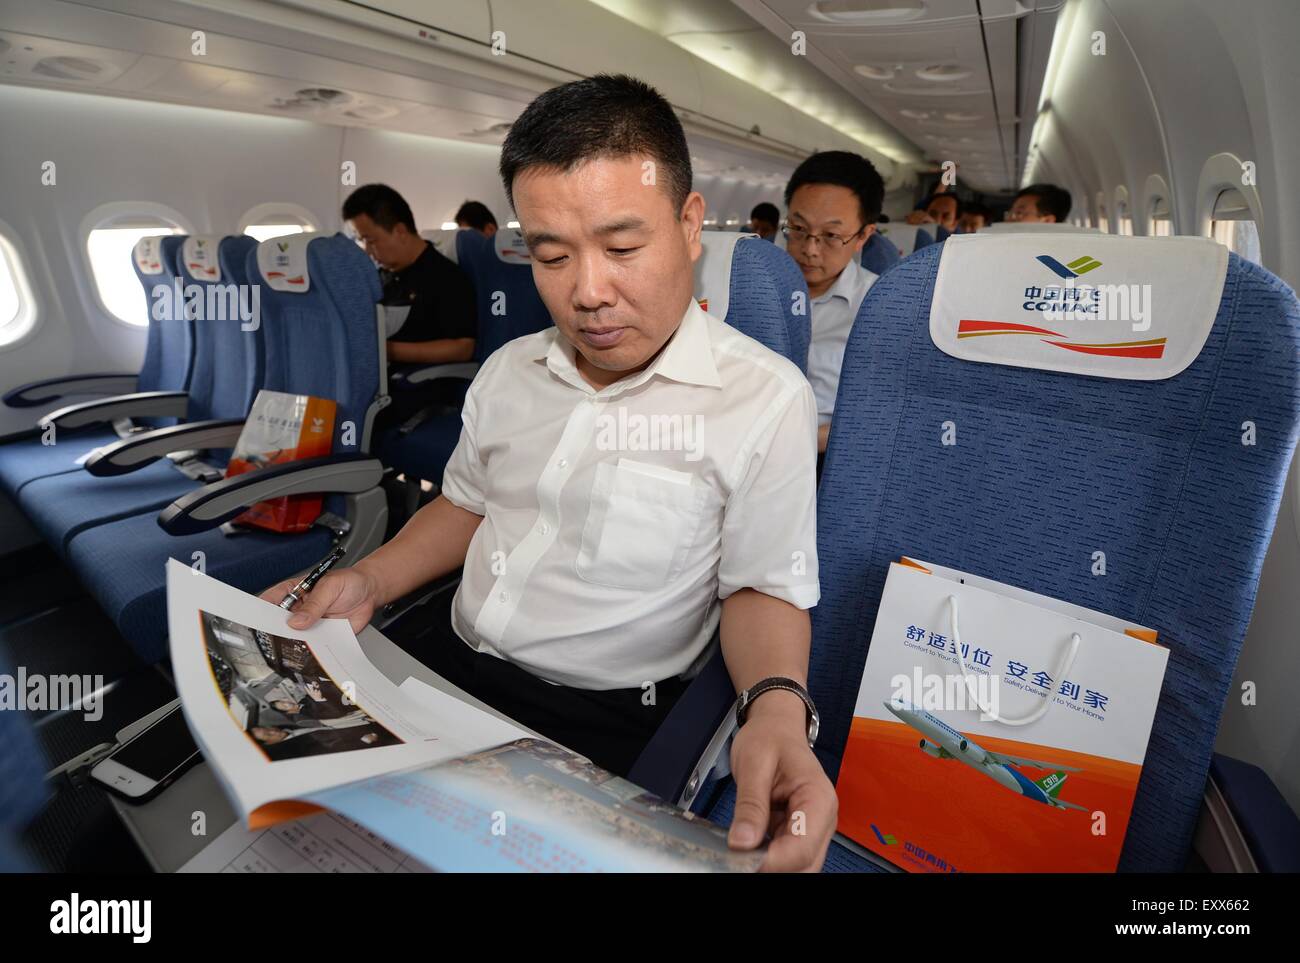 Xi'an, China's Shaanxi Province. 17th July, 2015. Passengers experience a demonstration flight of the ARJ21-700 jet in Xi'an, capital city of northwest China's Shaanxi Province, July 17, 2015. The ARJ21, short for Advanced Regional Jet for the 21st Century, is a type of regional airliner designed and manufactured by the Commercial Aircraft Corporation of China (COMAC). Over twenty representatives were invited on Friday to experience the one-hour demonstration flight and give feedbacks so as to help improve the overall performance of the jet. © Li Yibo/Xinhua/Alamy Live News Stock Photo